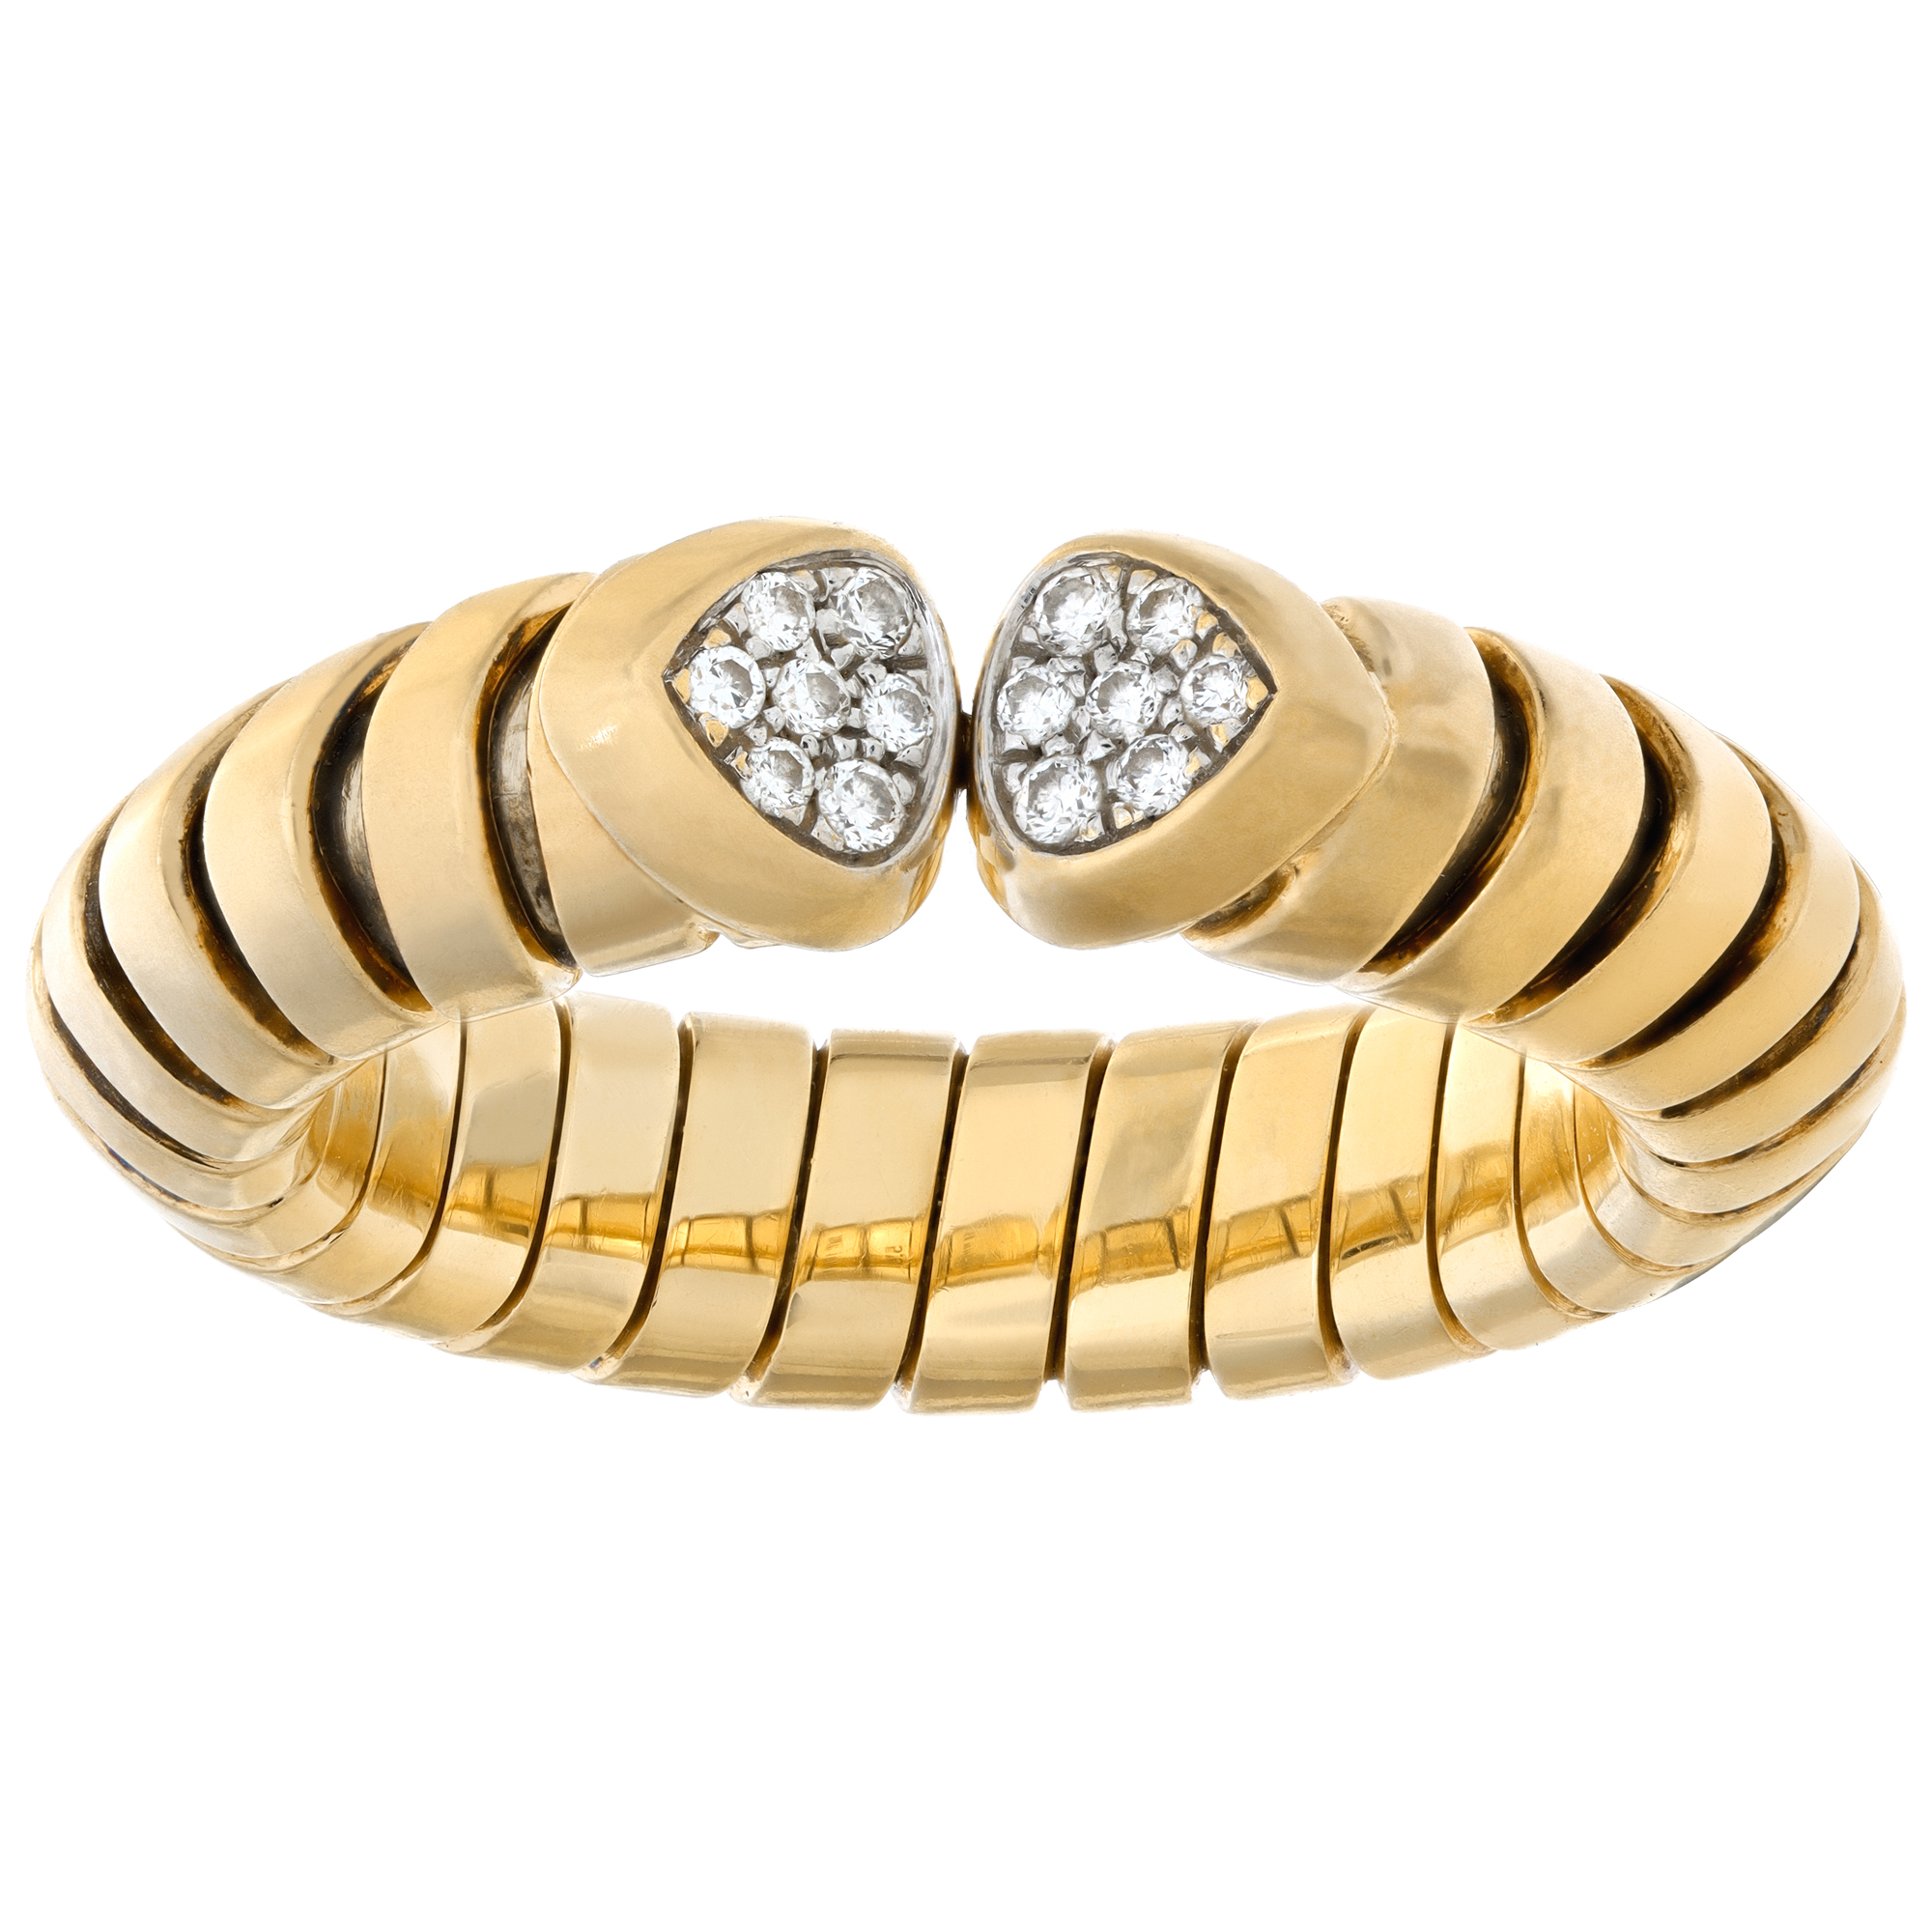  Marina B trisolina ring in 18k yellow gold with diamond accents